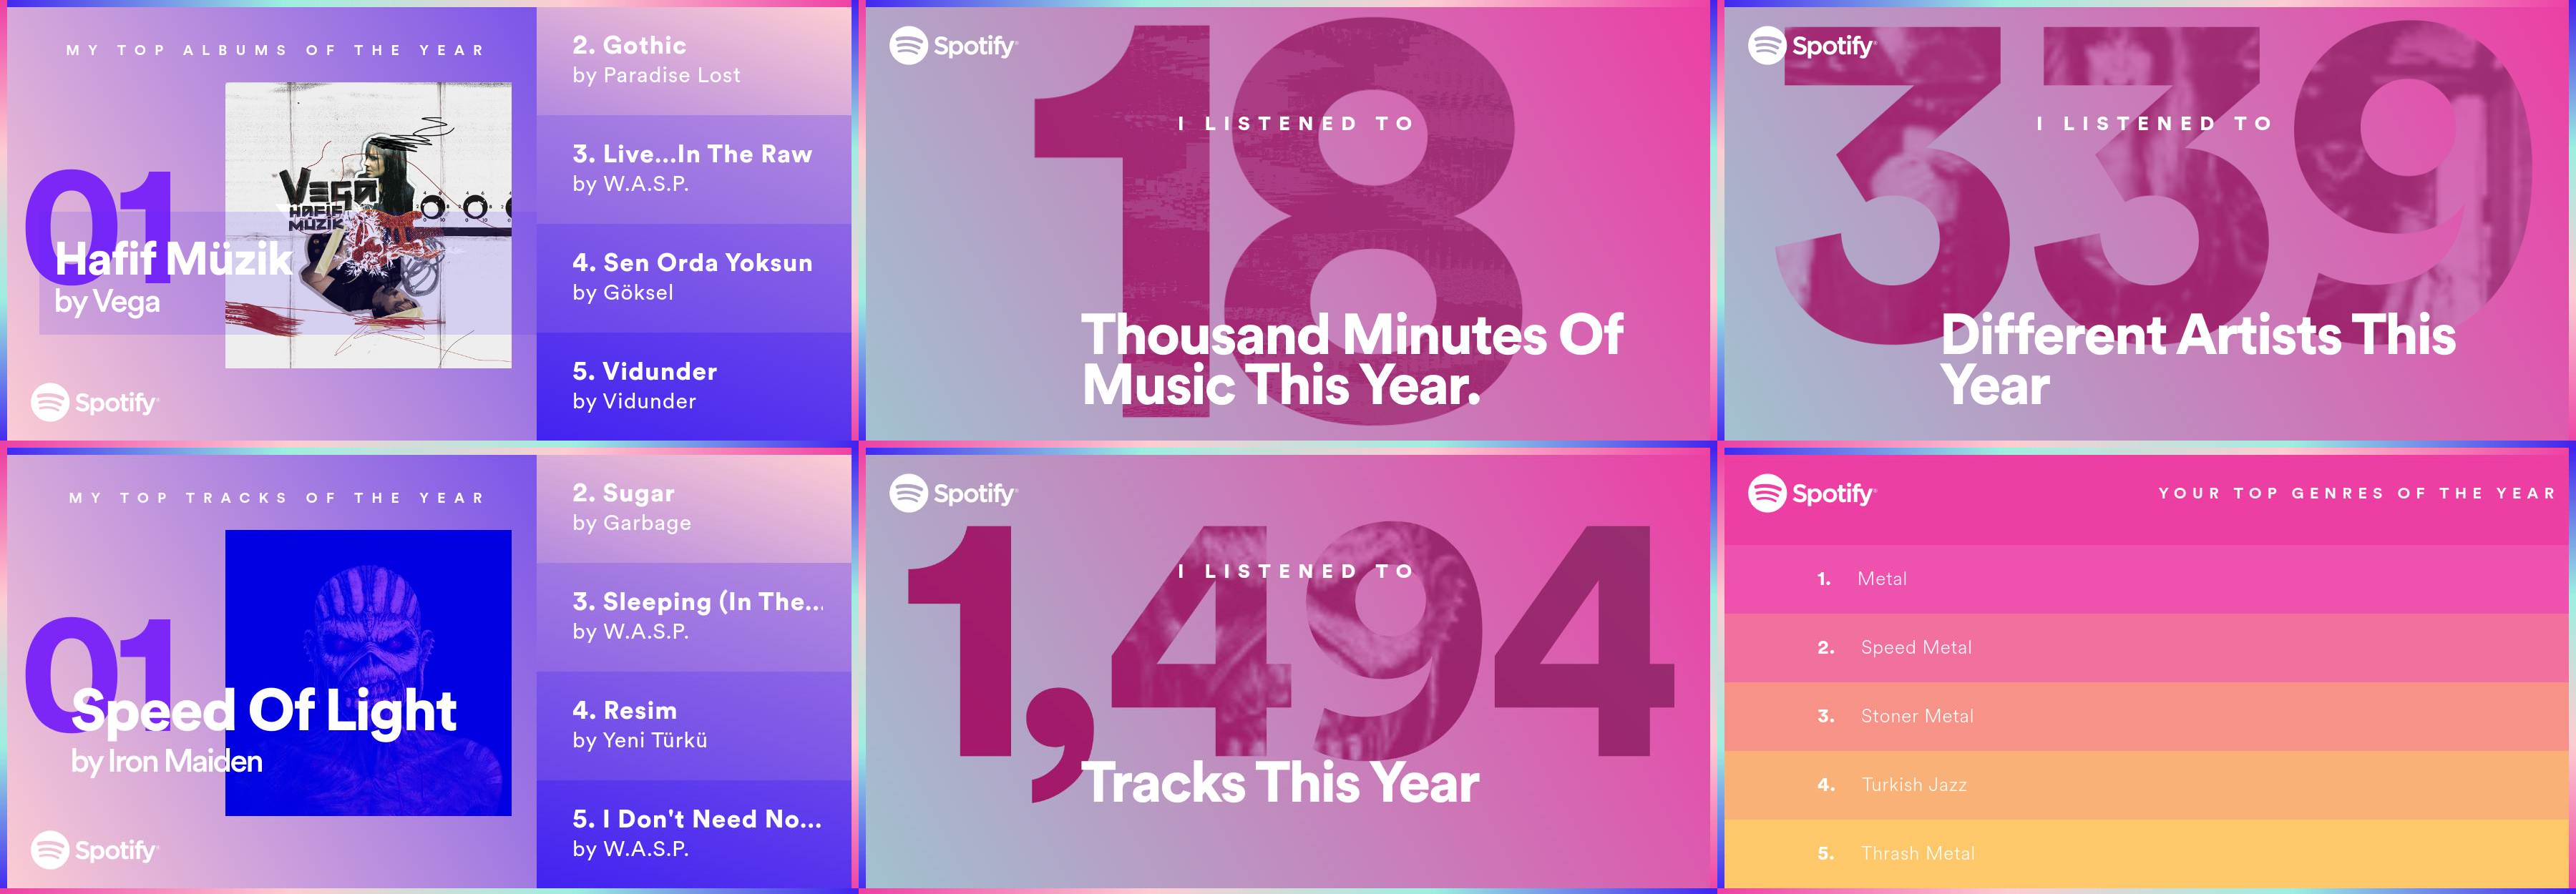 Spotify-Year In Music